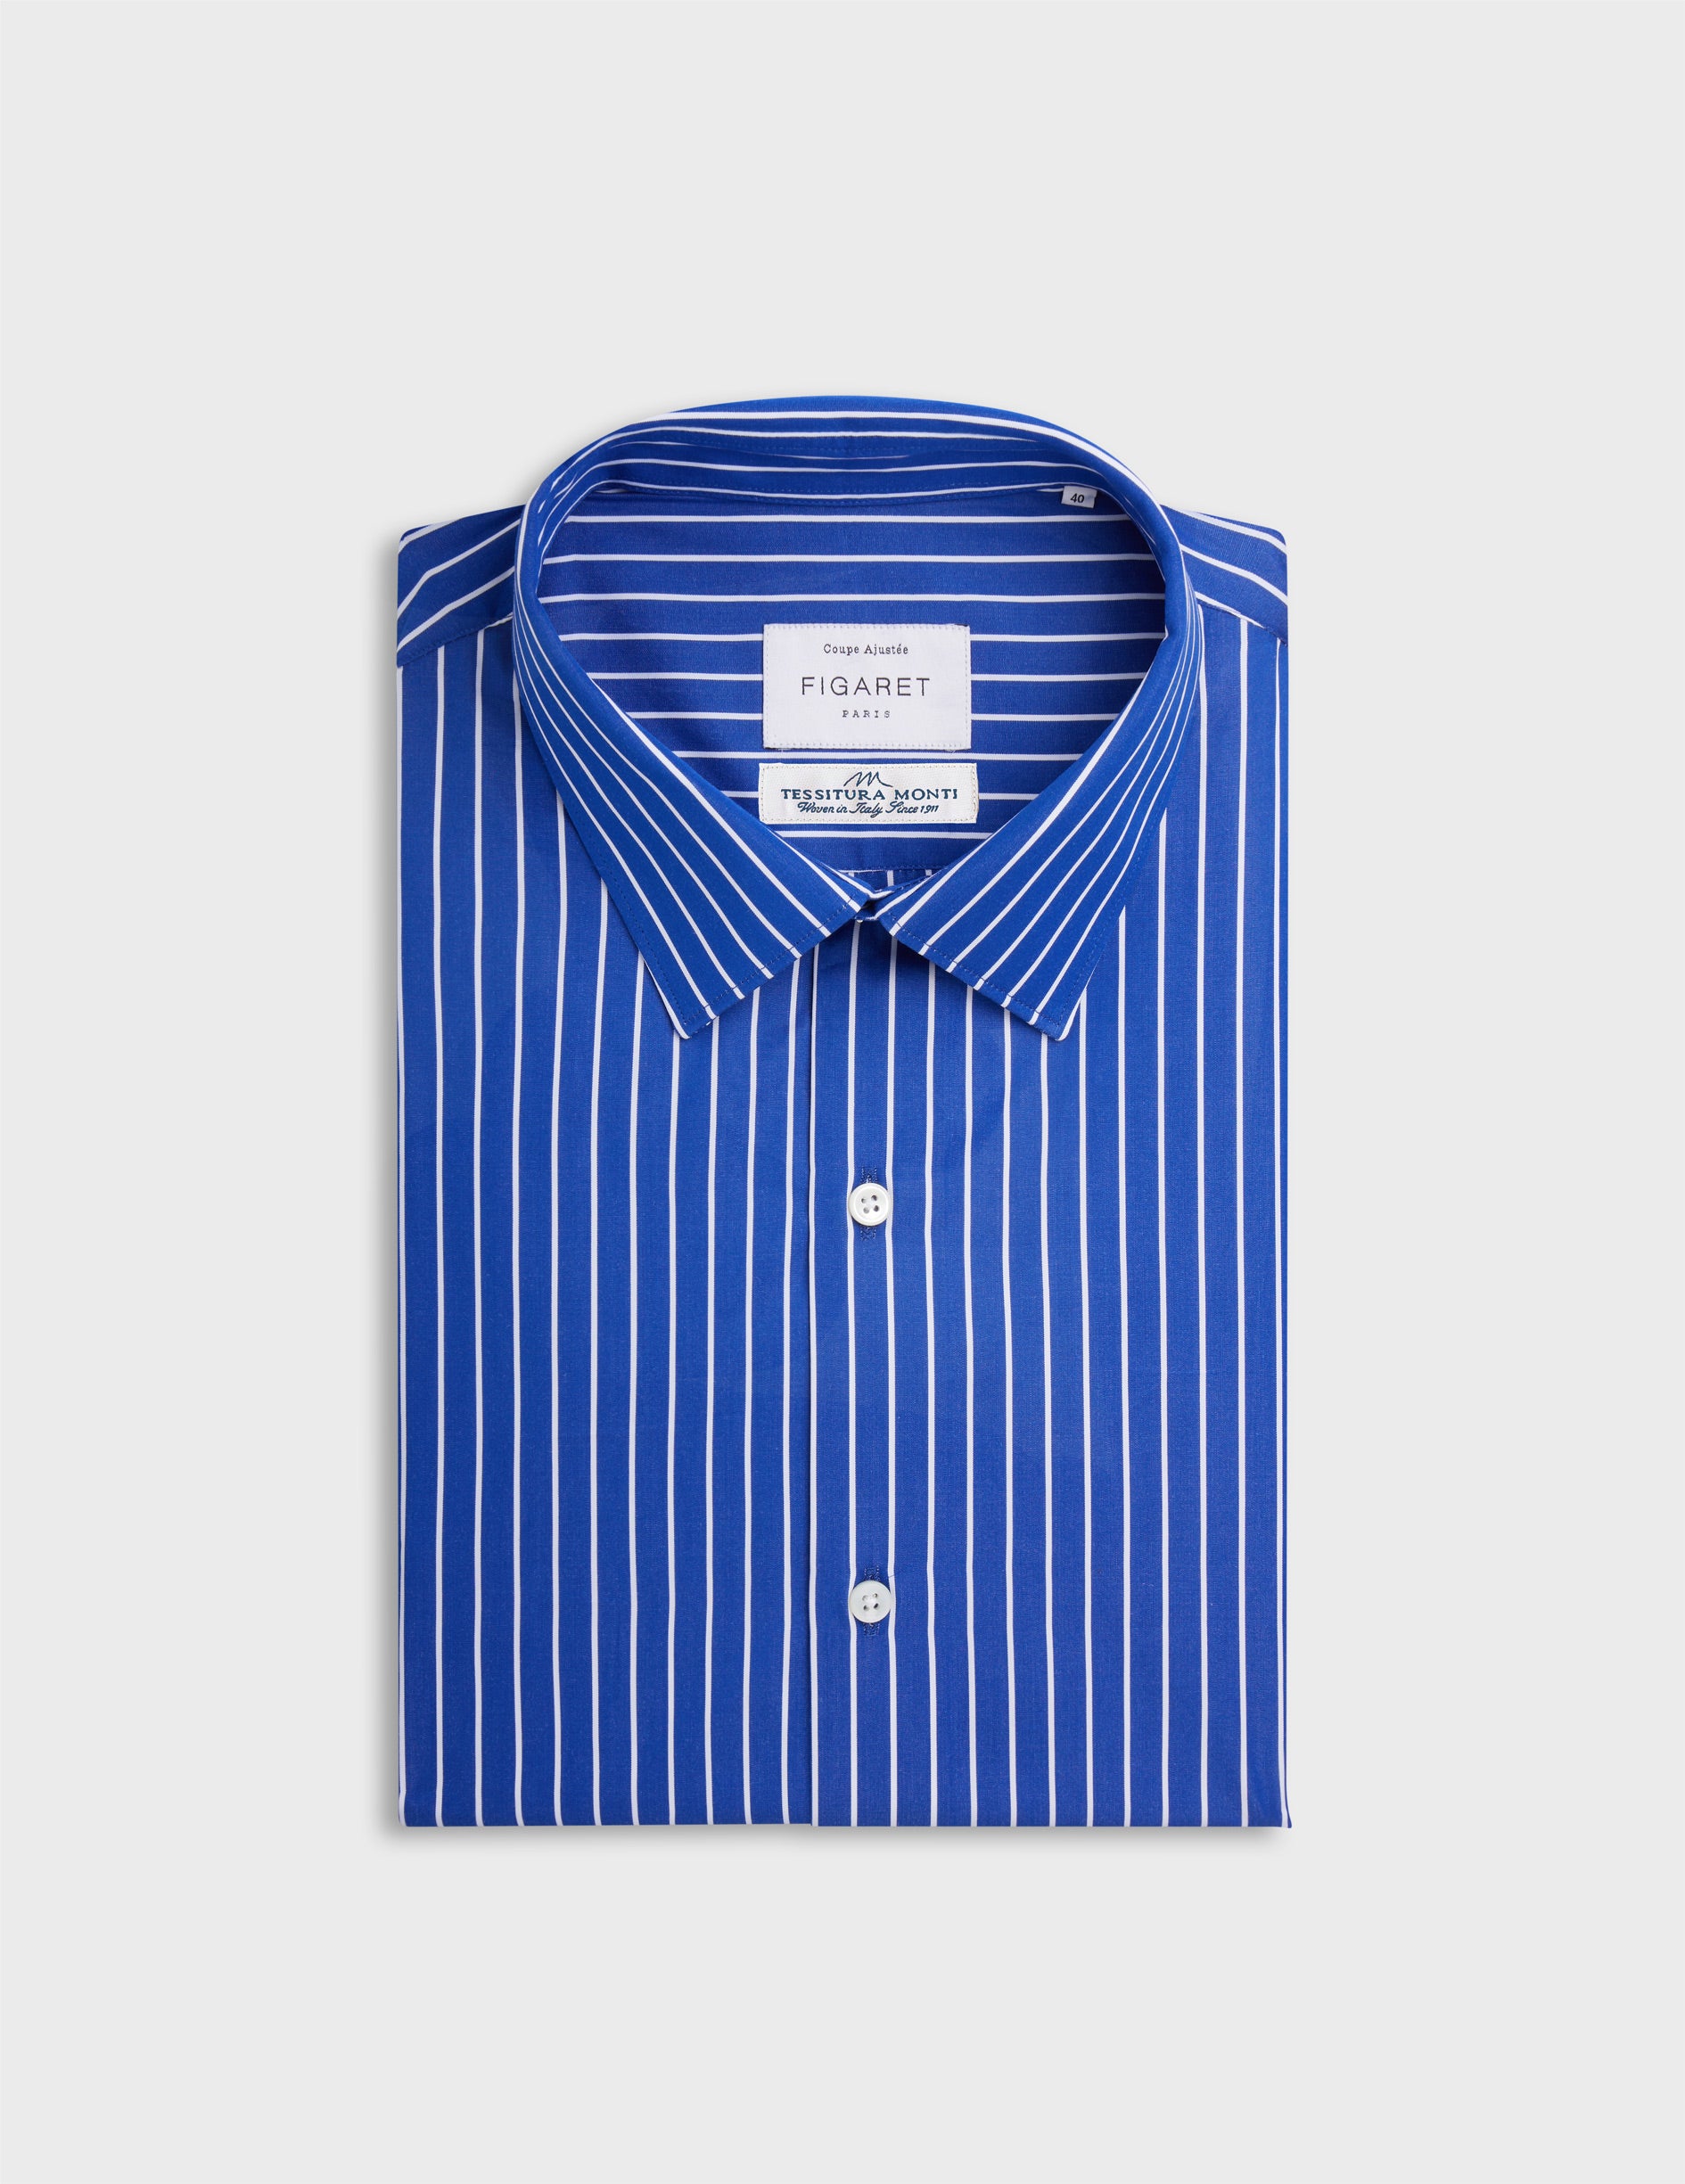  fitted navy Striped shirt - Poplin - Figaret Collar